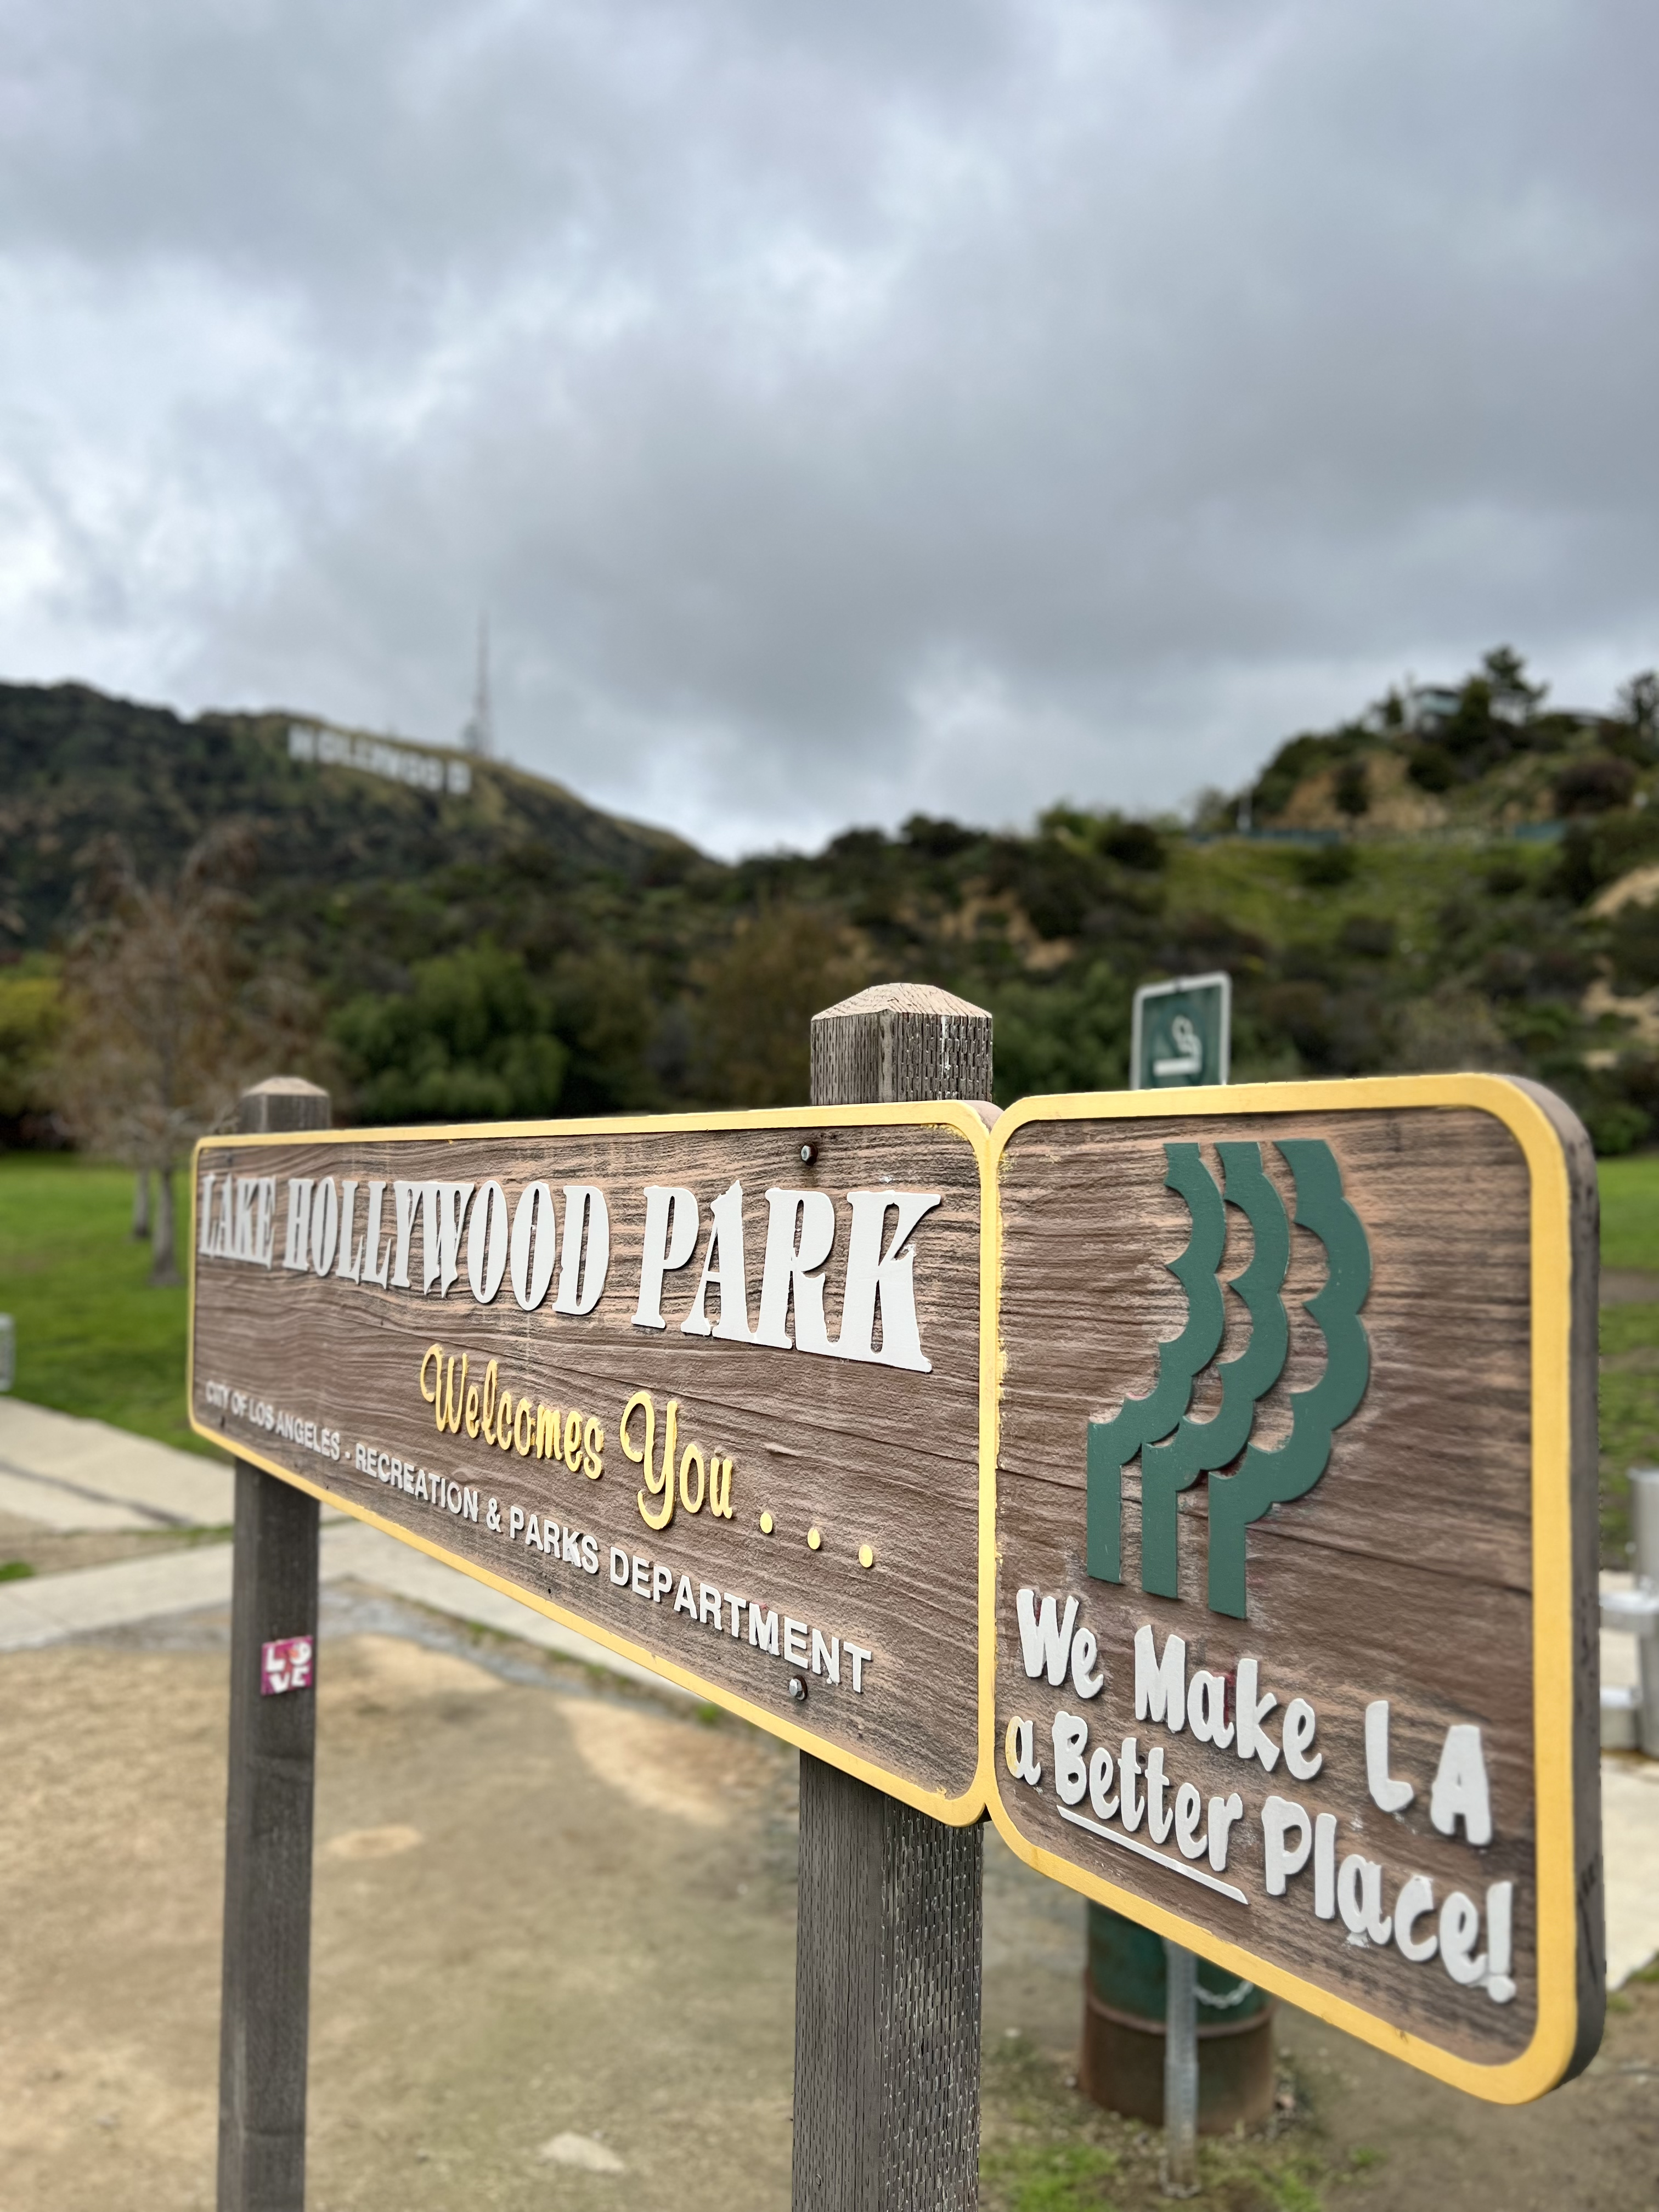 Lake Hollywood Park with the famous Hollywood sign in the background